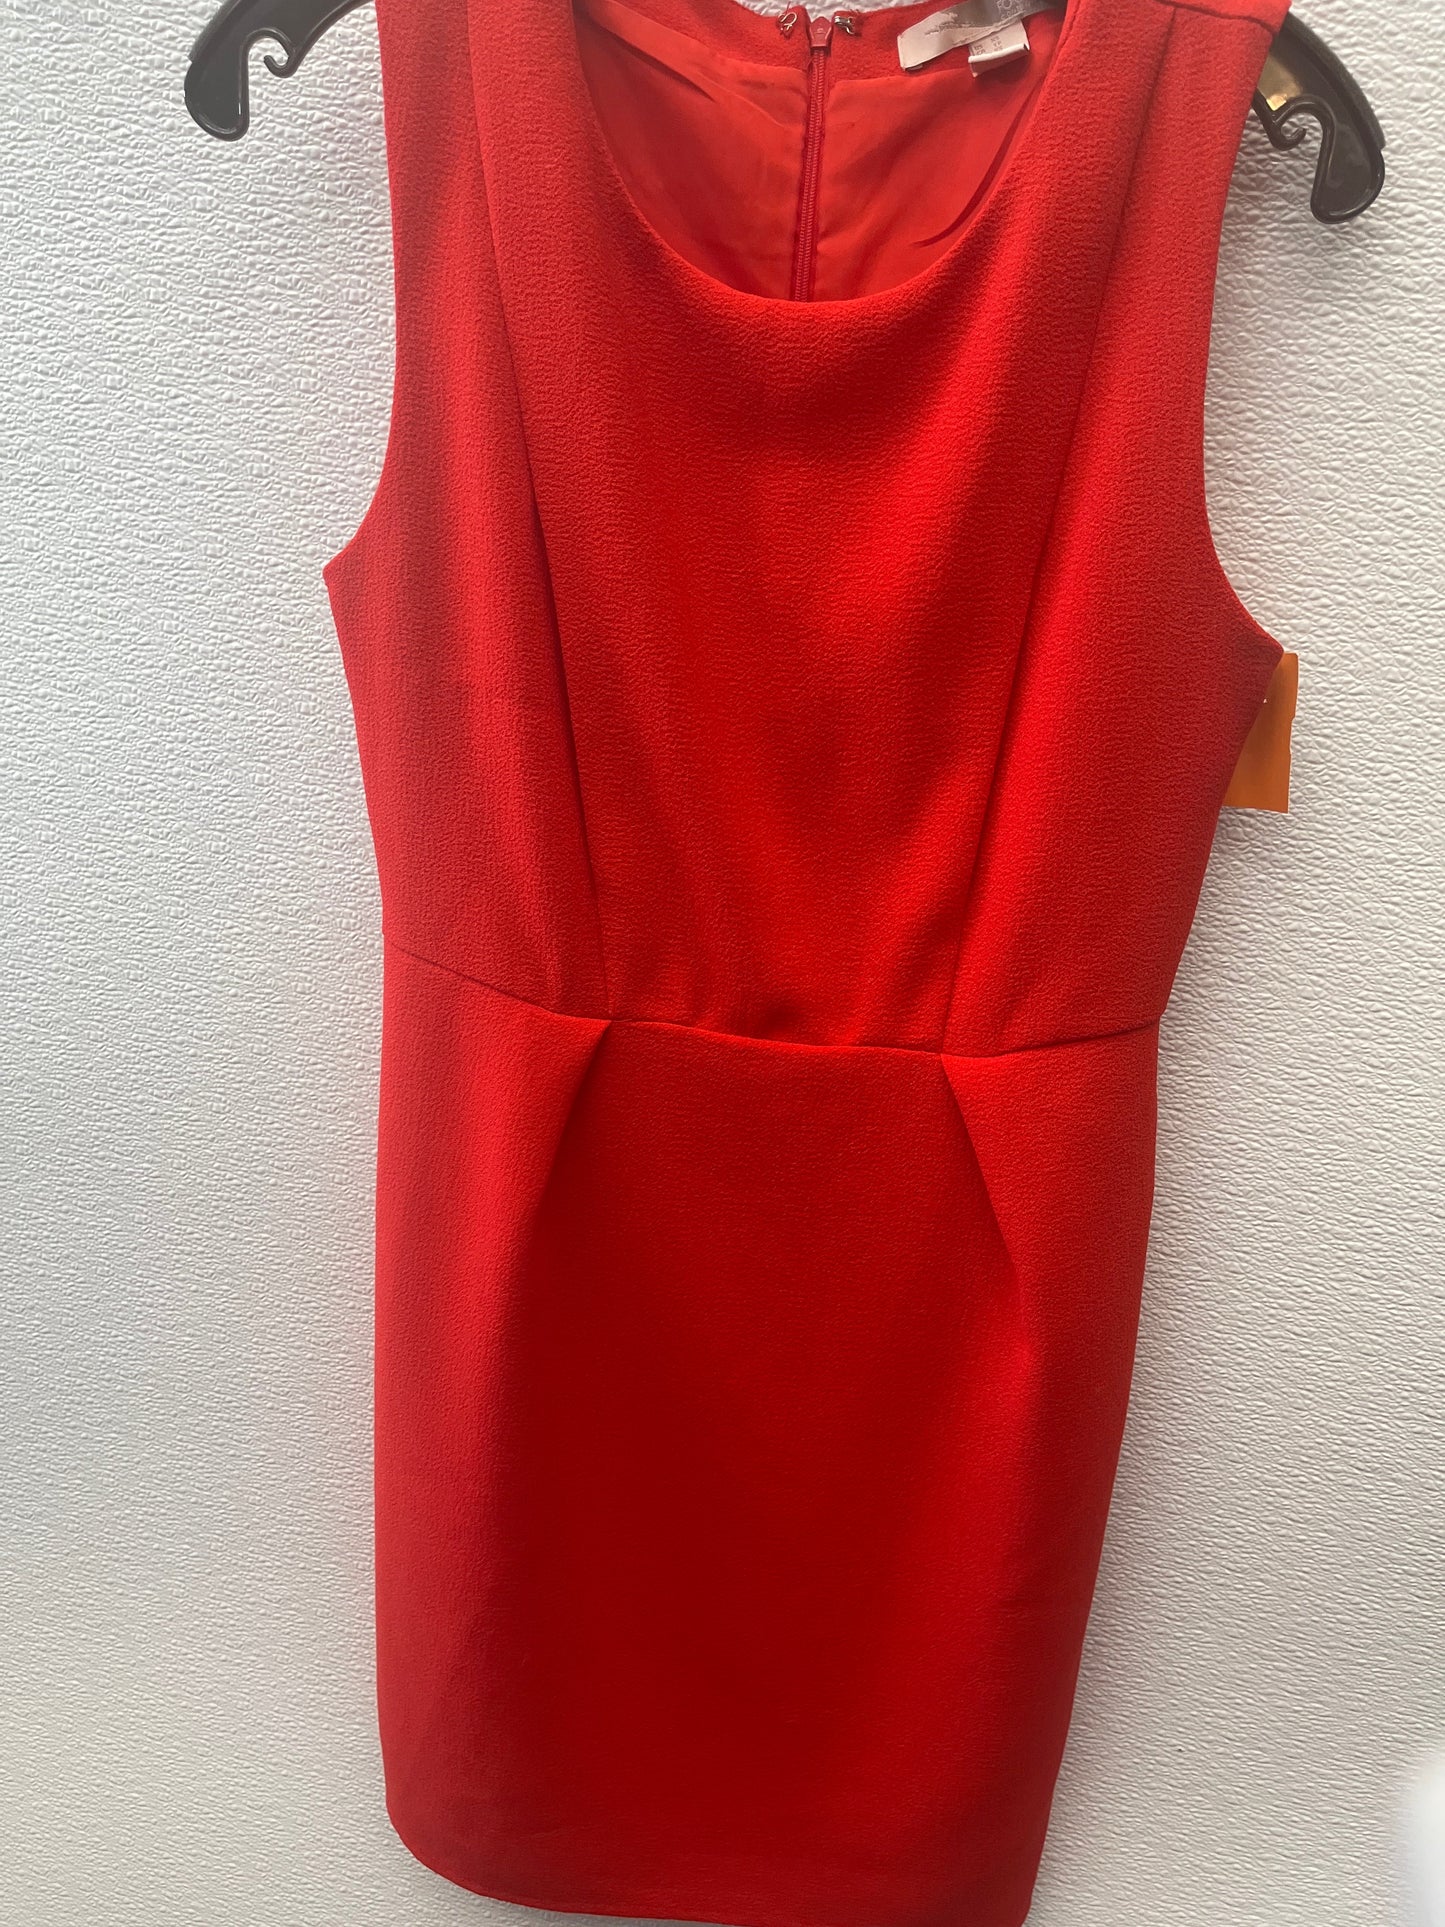 Red Dress Casual Midi Forever 21, Size Xs